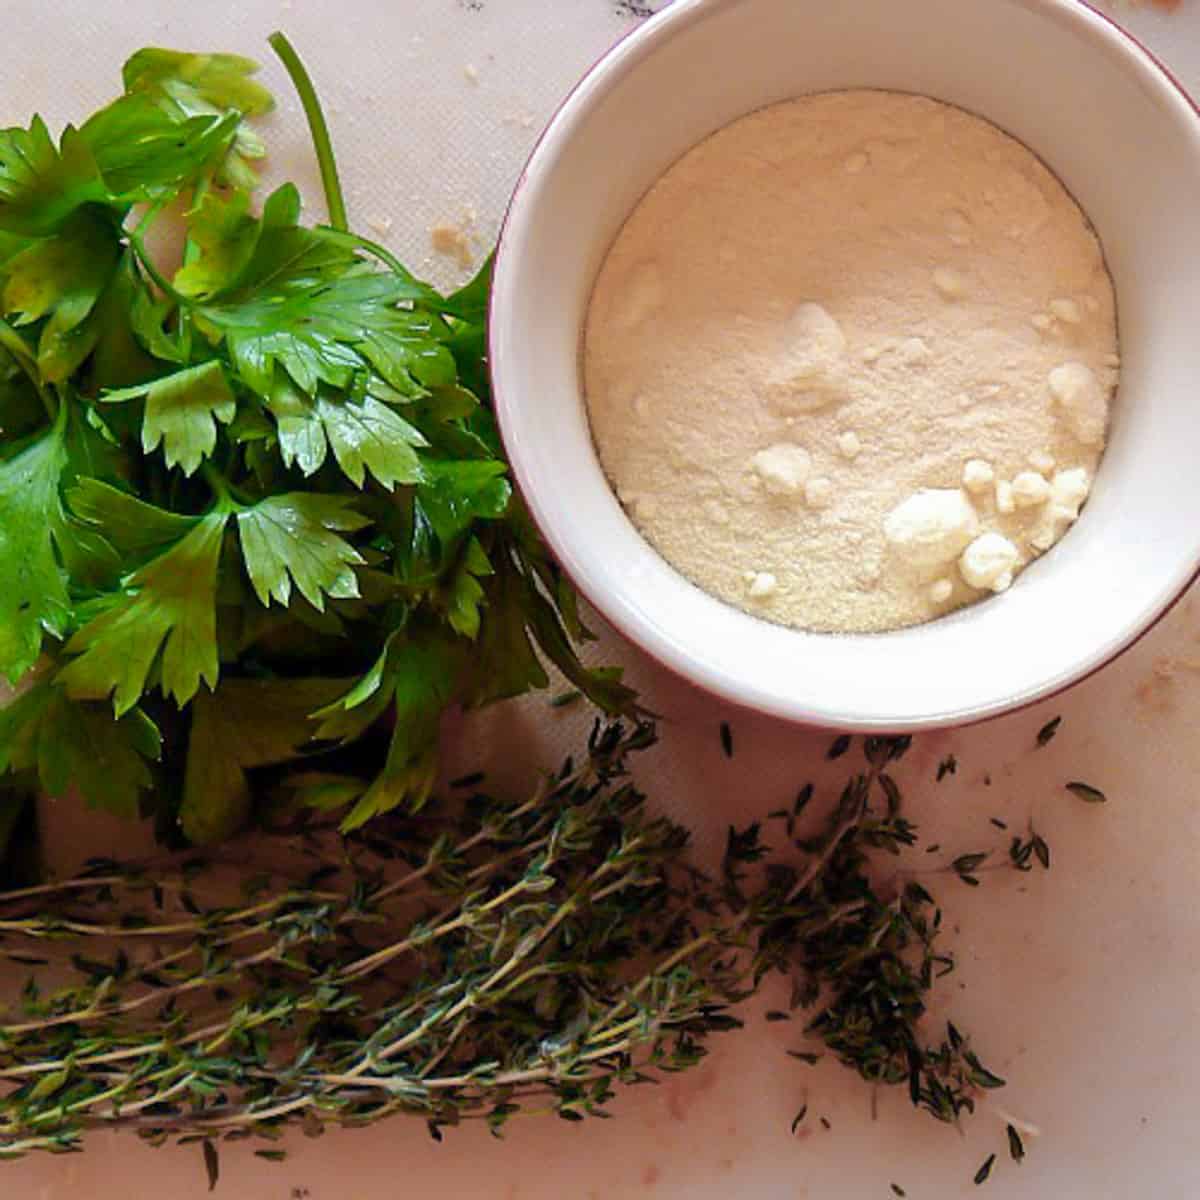 Fresh parsley, thyme and a bowl of Romano cheese.